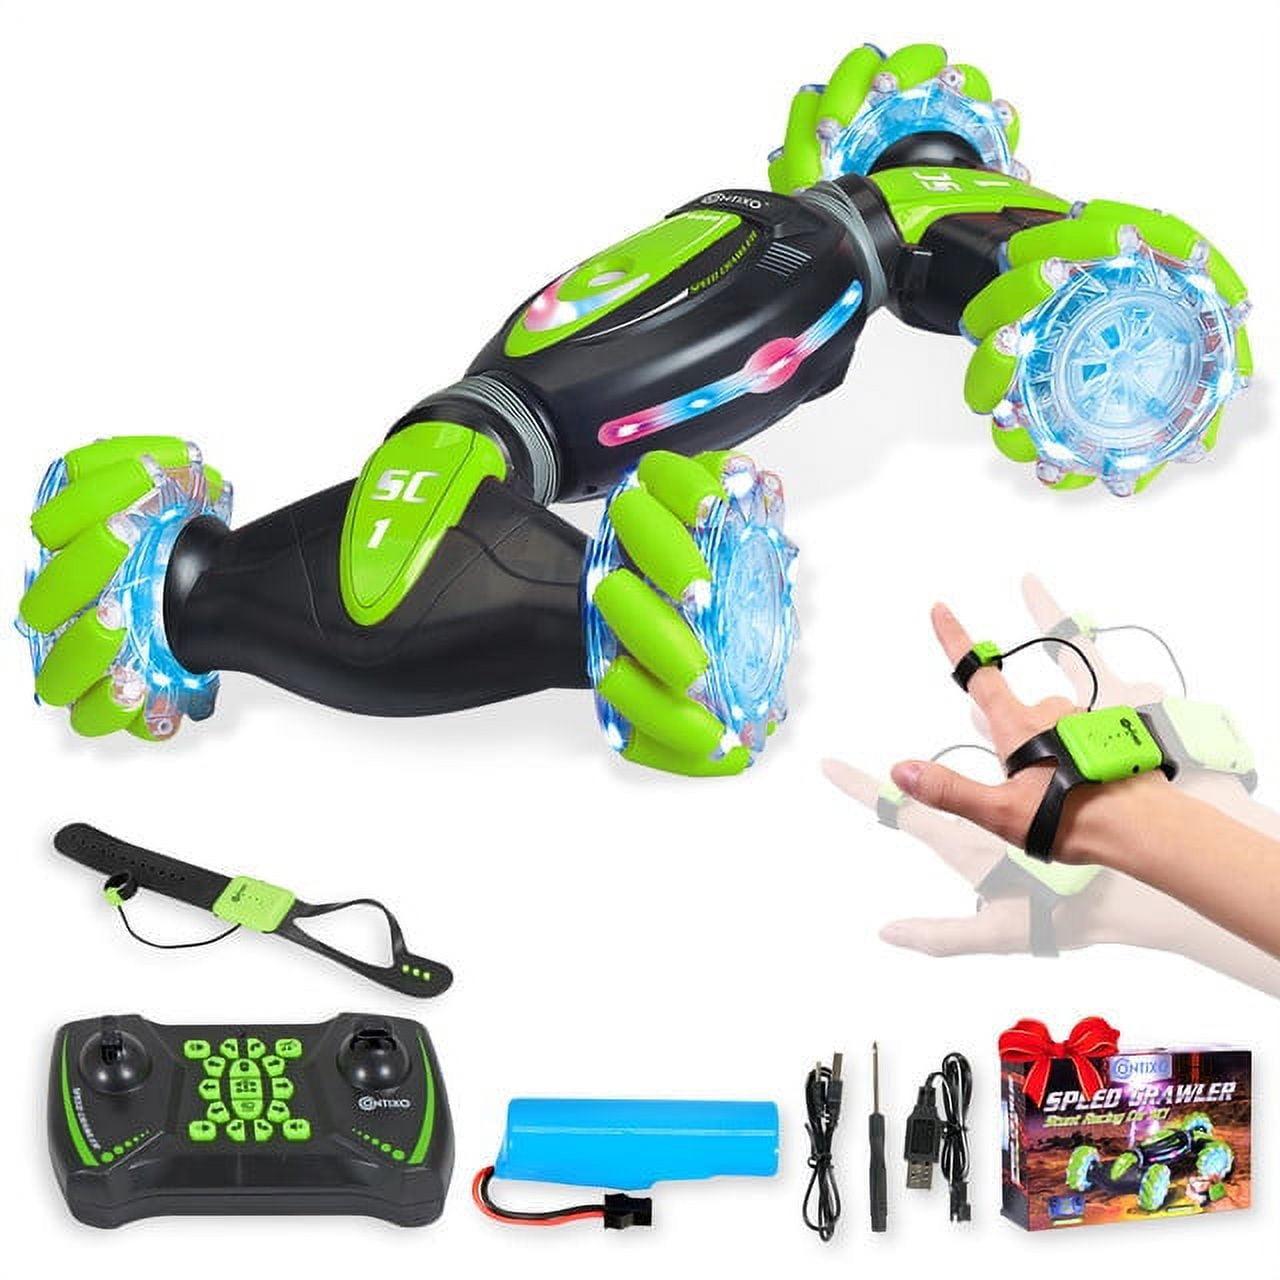 Car Remote Car: Thrilling Car Remote Cars for Kids and Enthusiasts